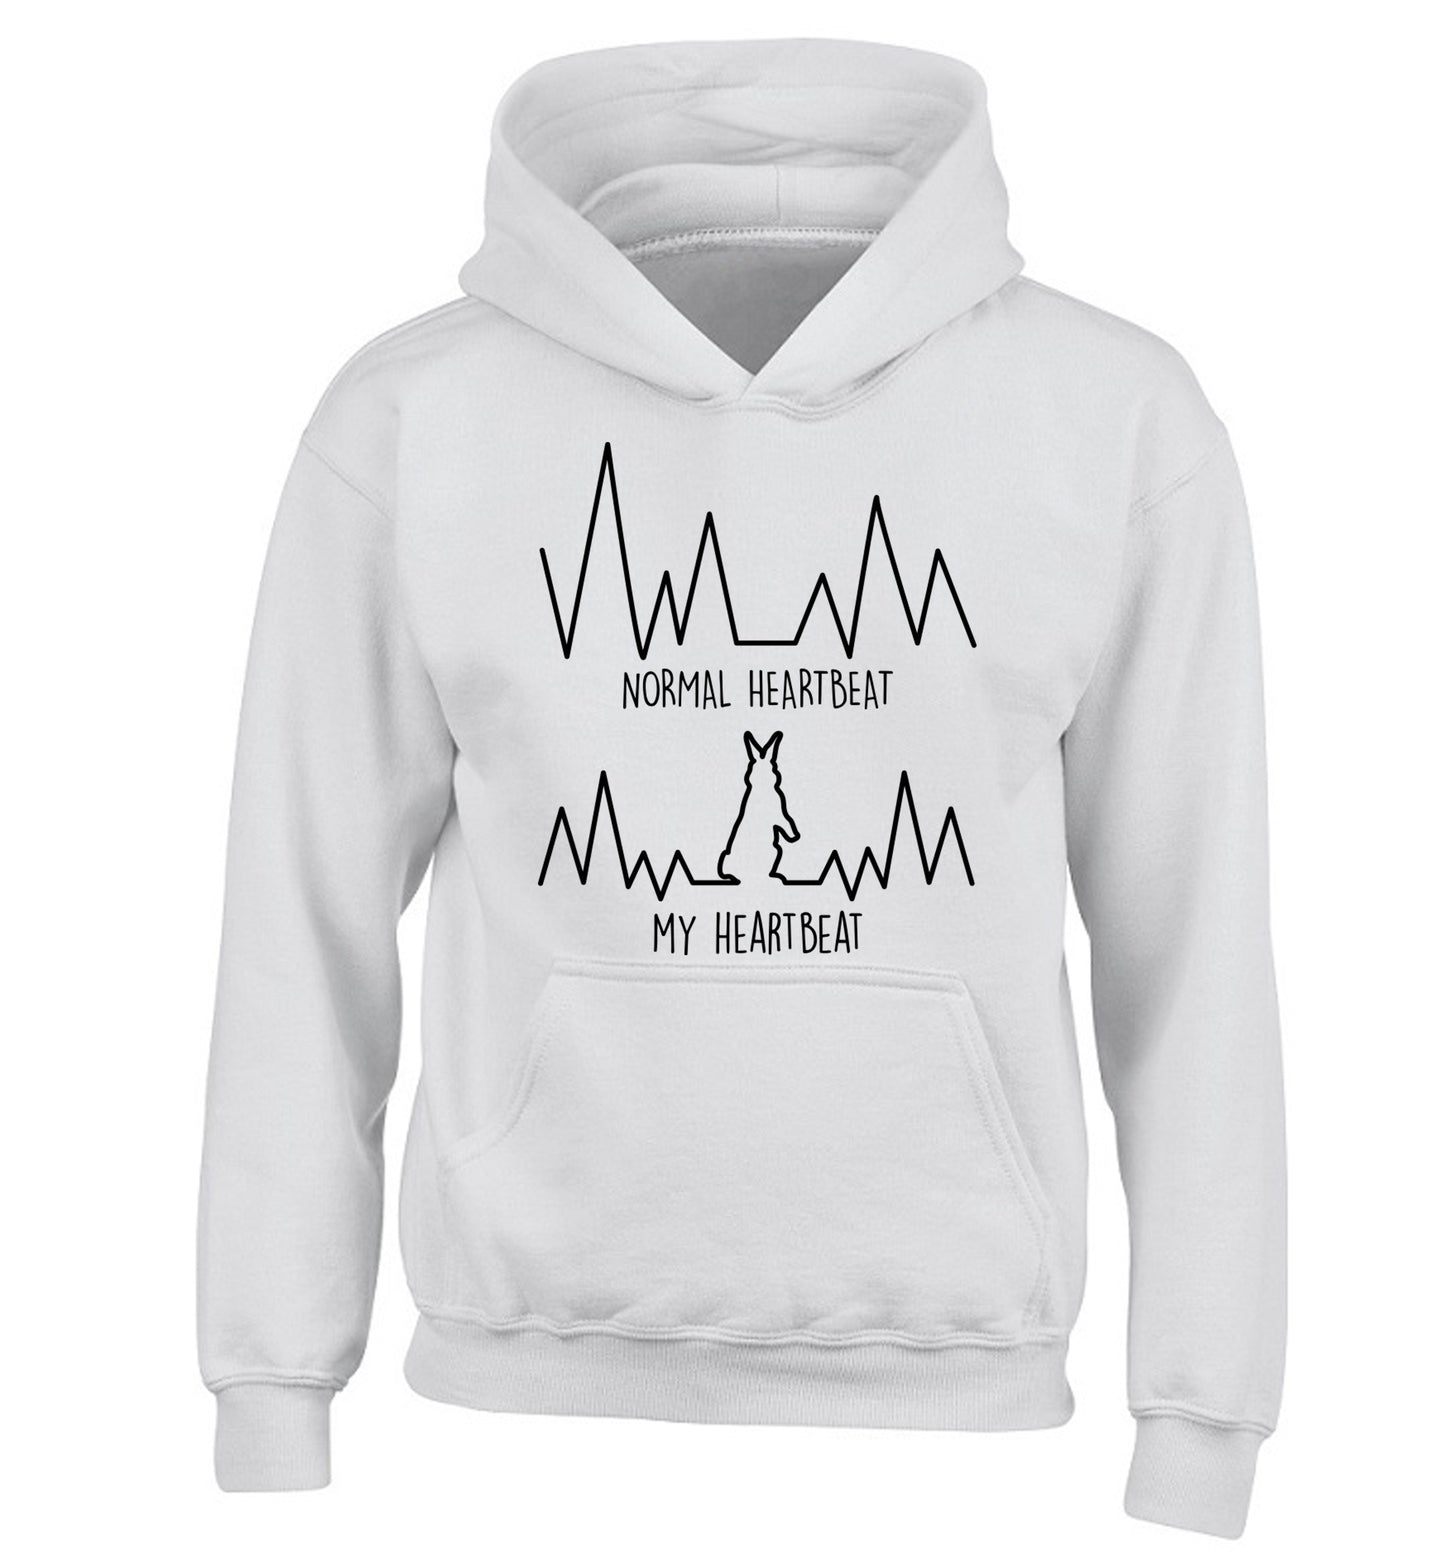 Normal heartbeat, my heartbeat rabbit lover children's white hoodie 12-14 Years